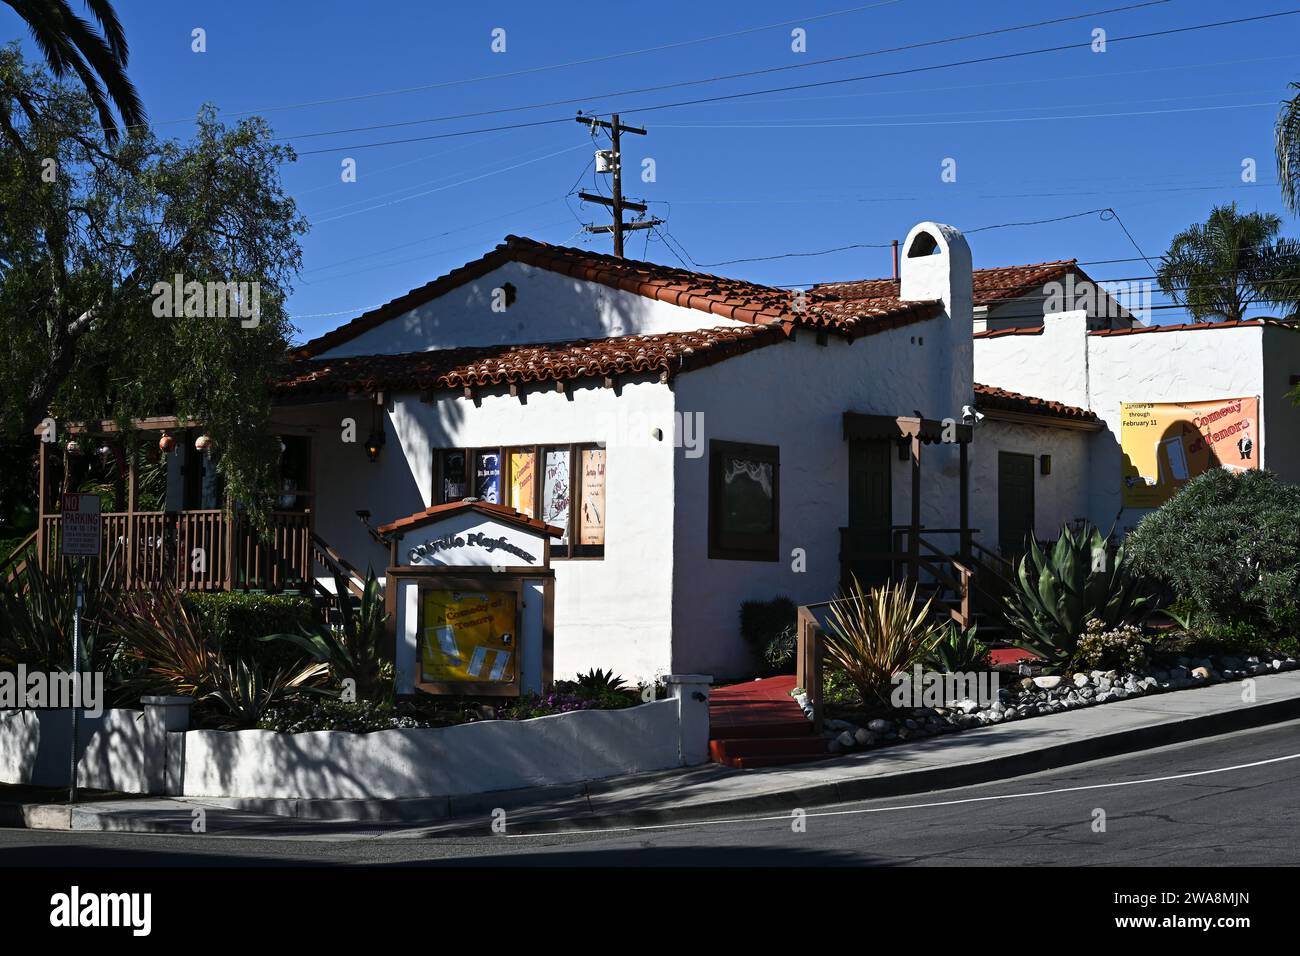 SAN CLEMENTE, CALIFORNIA - 1 JAN 2024: The Cabrillo Playhouse, a small community theater featuring plays, variety shows, concerts and more in a cozy s Stock Photo